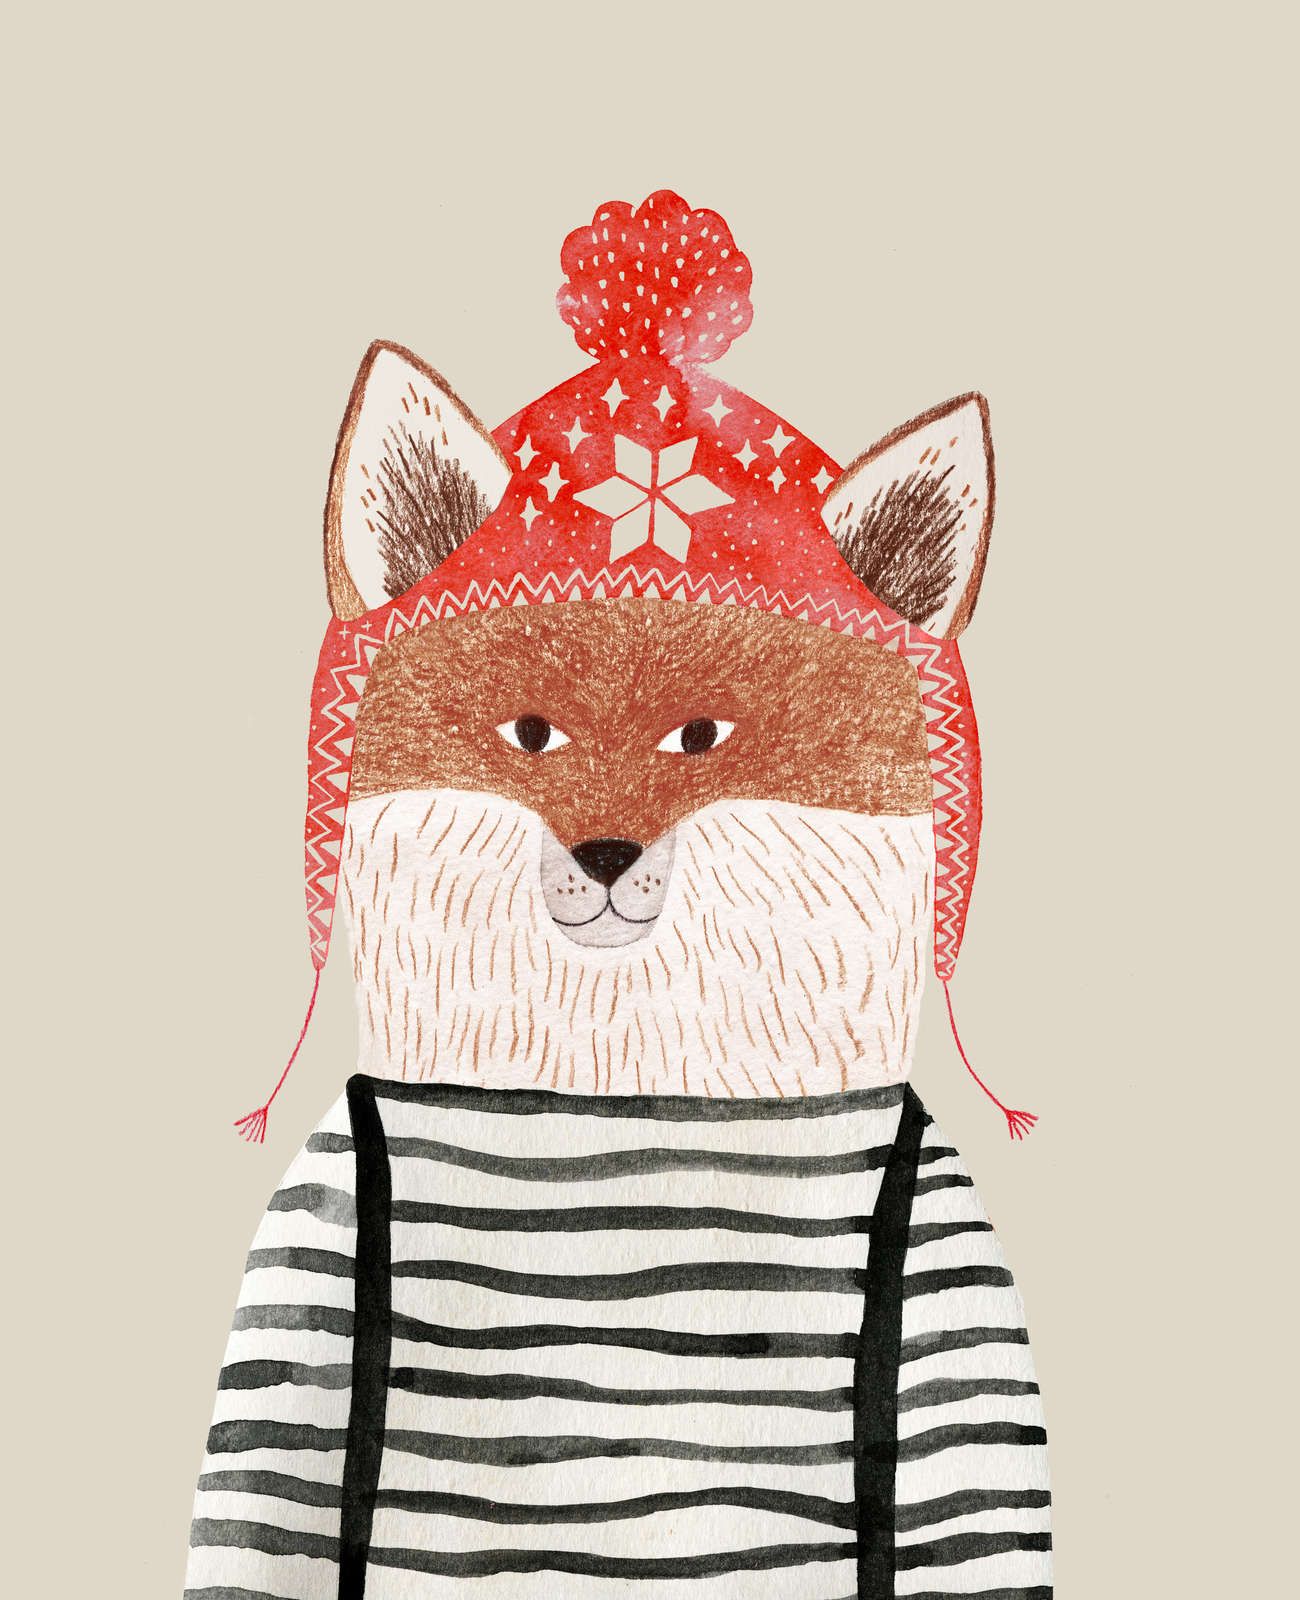             Fox with pom-pom hat mural - Smooth & slightly shiny non-woven
        